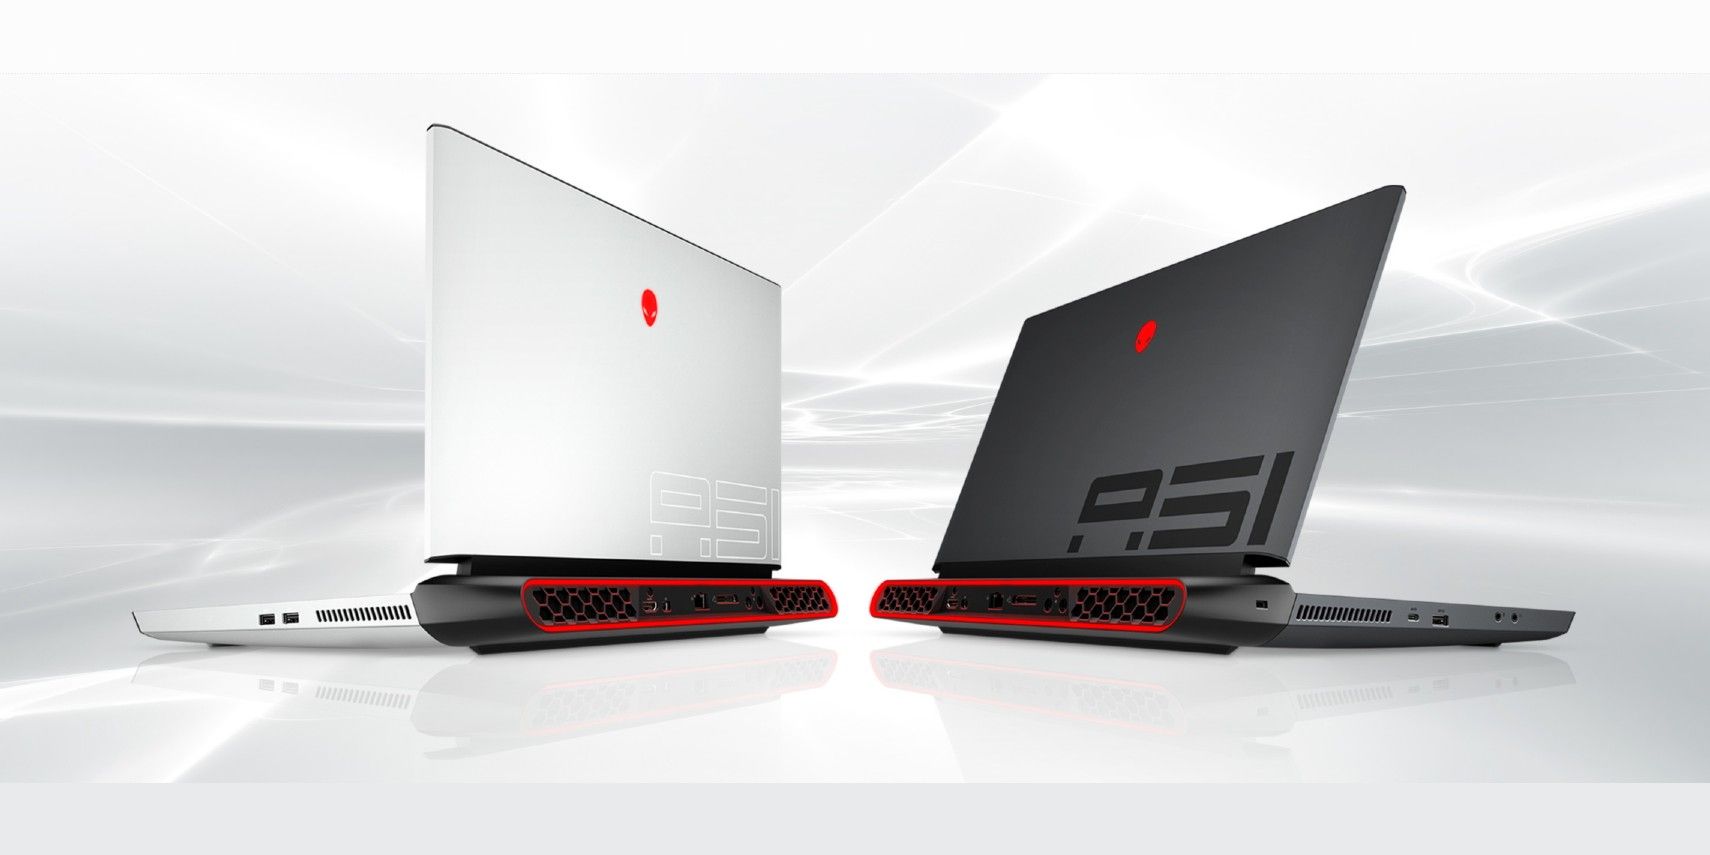 Whats The Most Powerful Gaming Laptop In The World